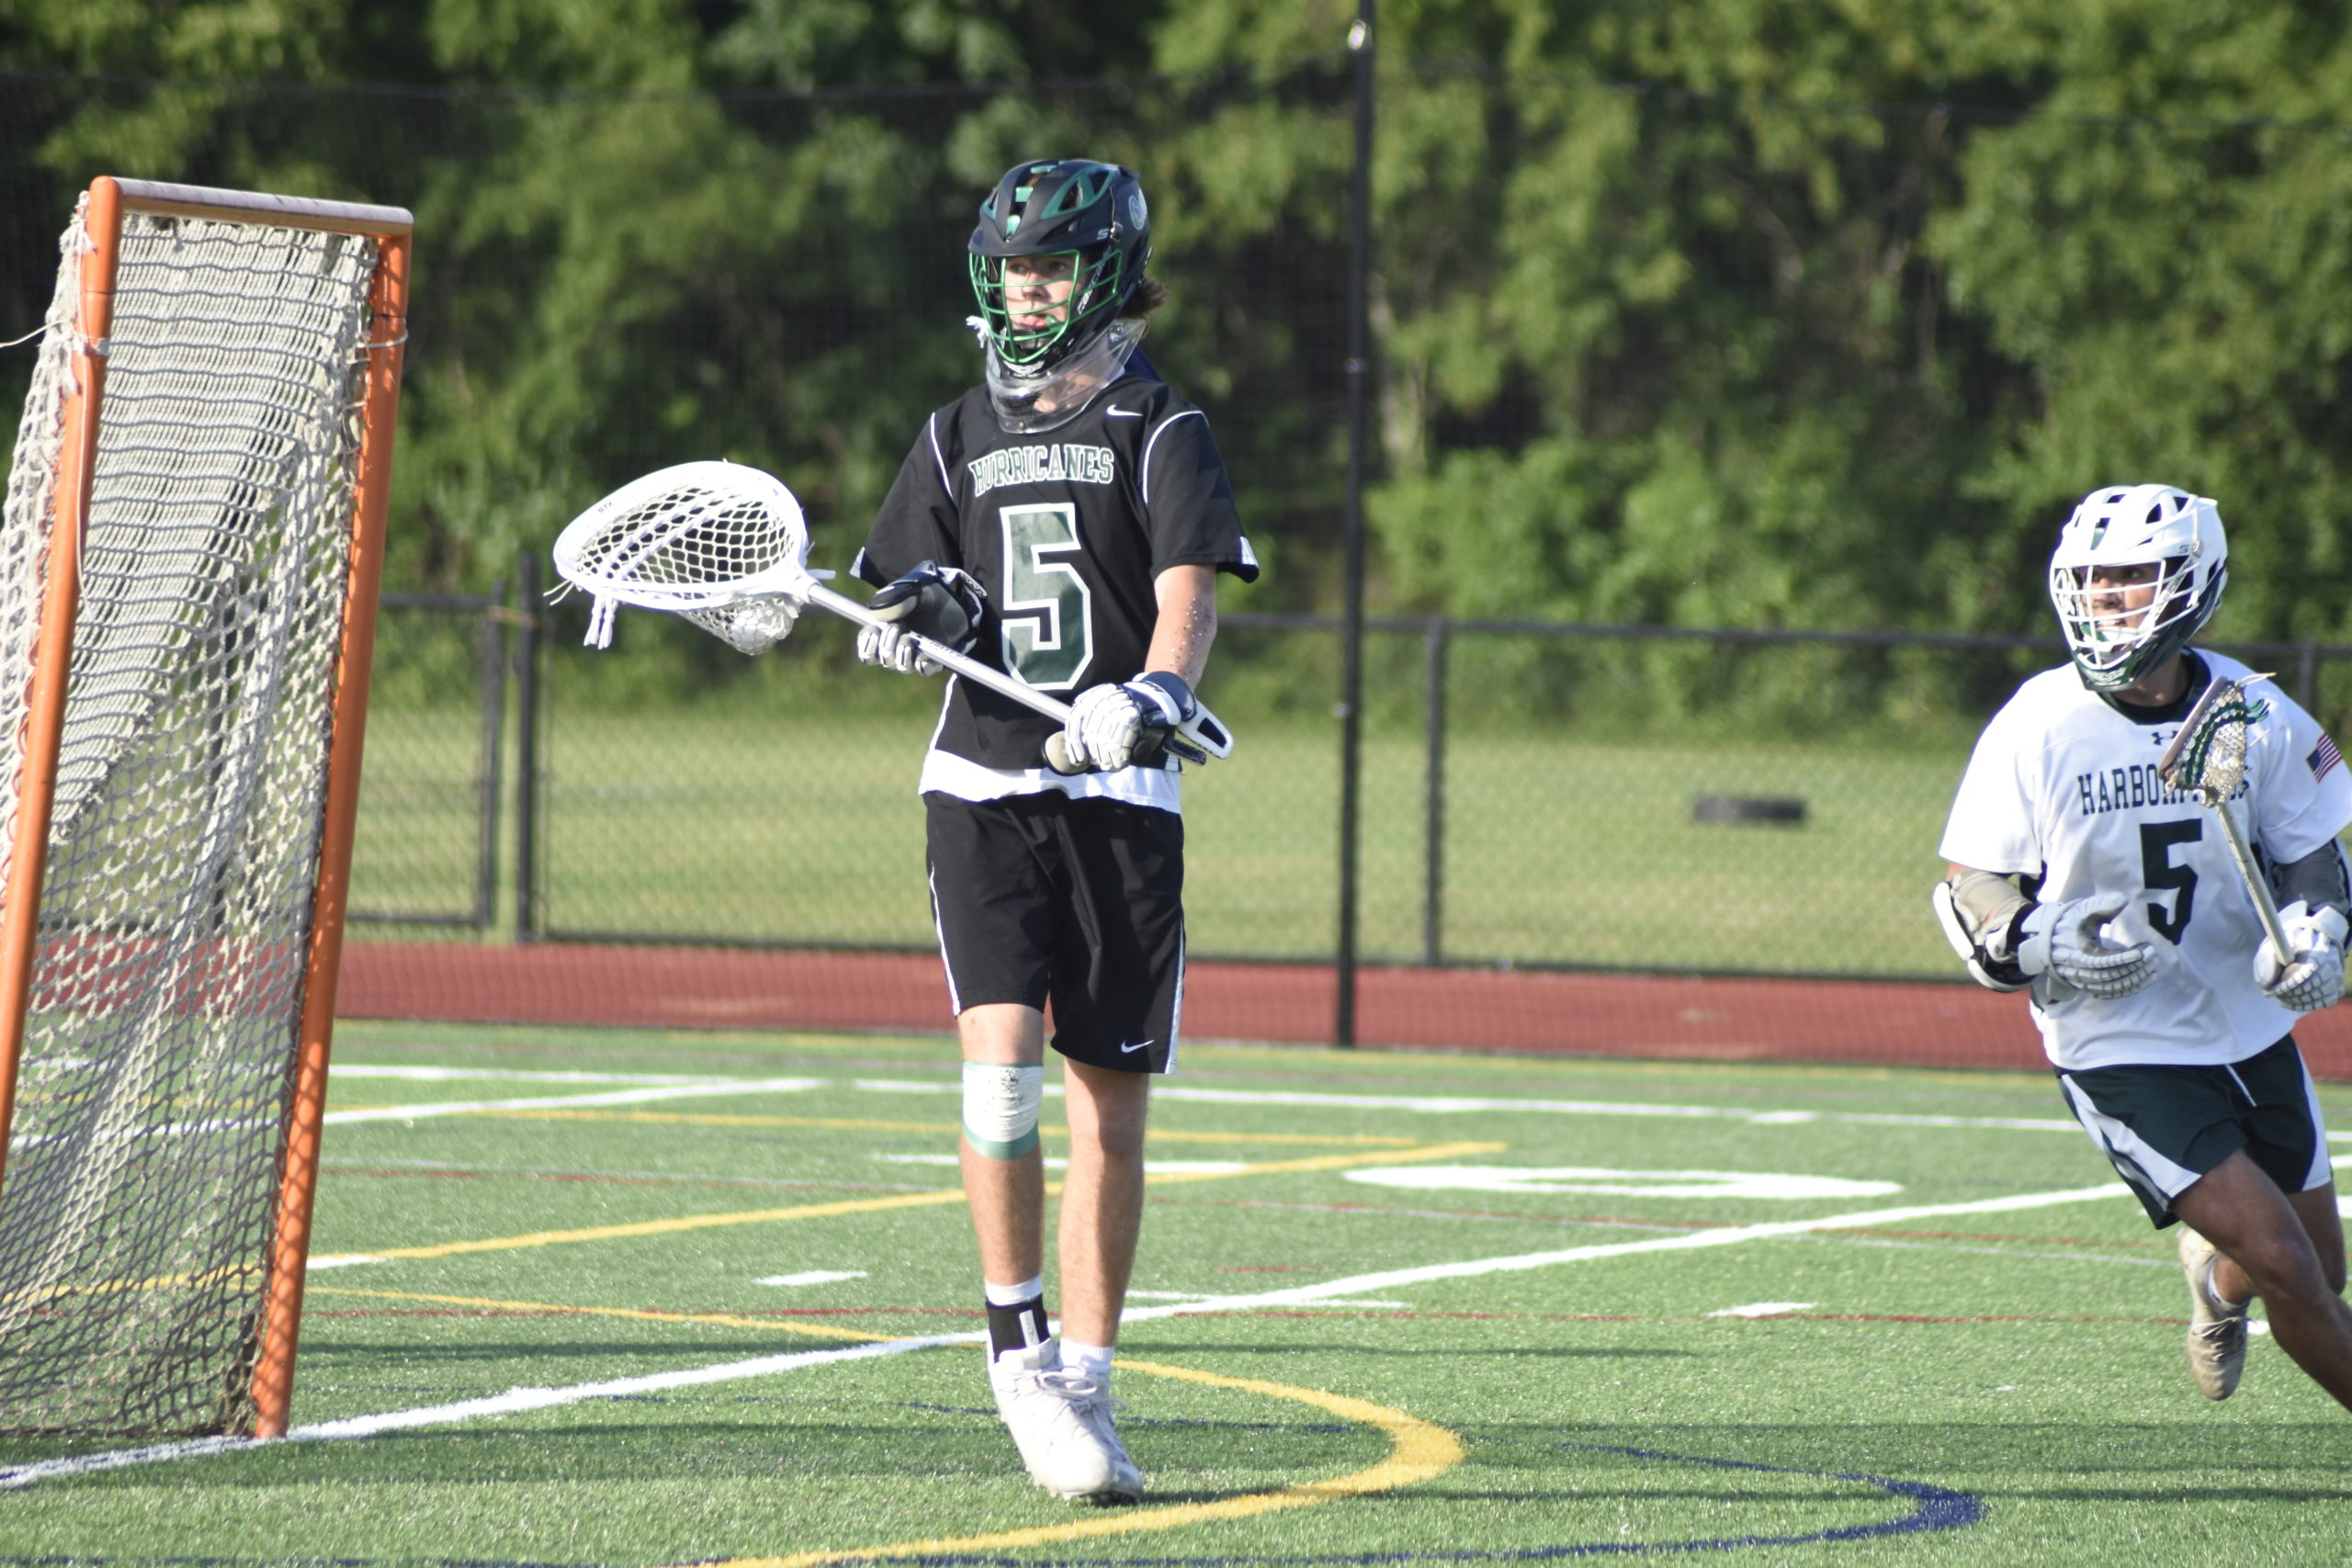 Westhampton Beach goalie Conor Farnan looks for an open player to pass to.